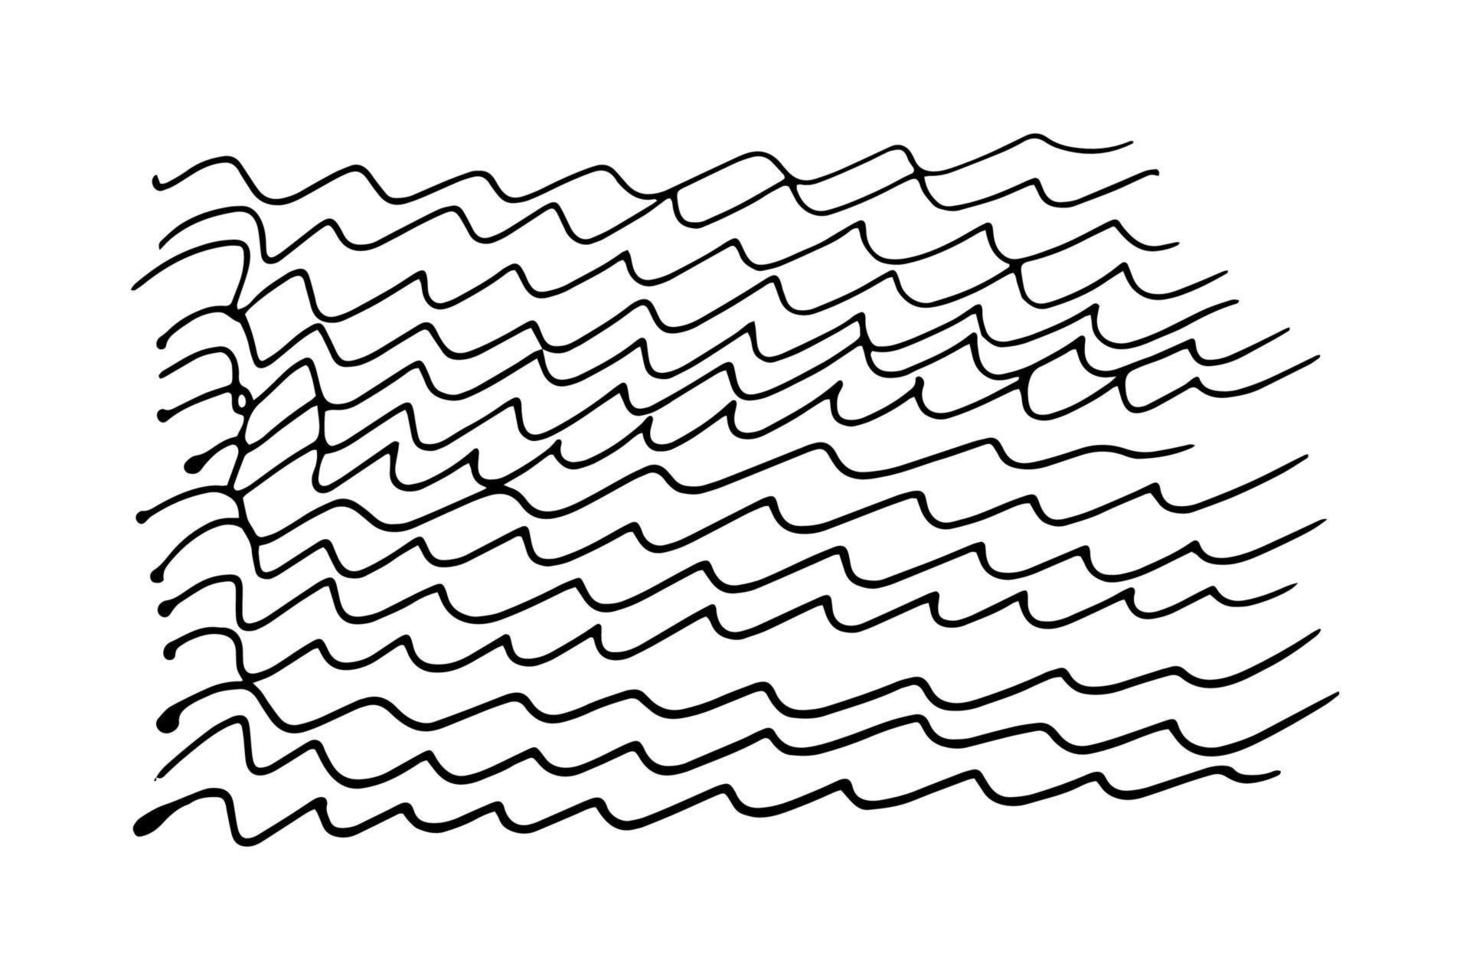 waves doodle doodle style. wavy lines drawn by hand carelessly illustration on a white background vector